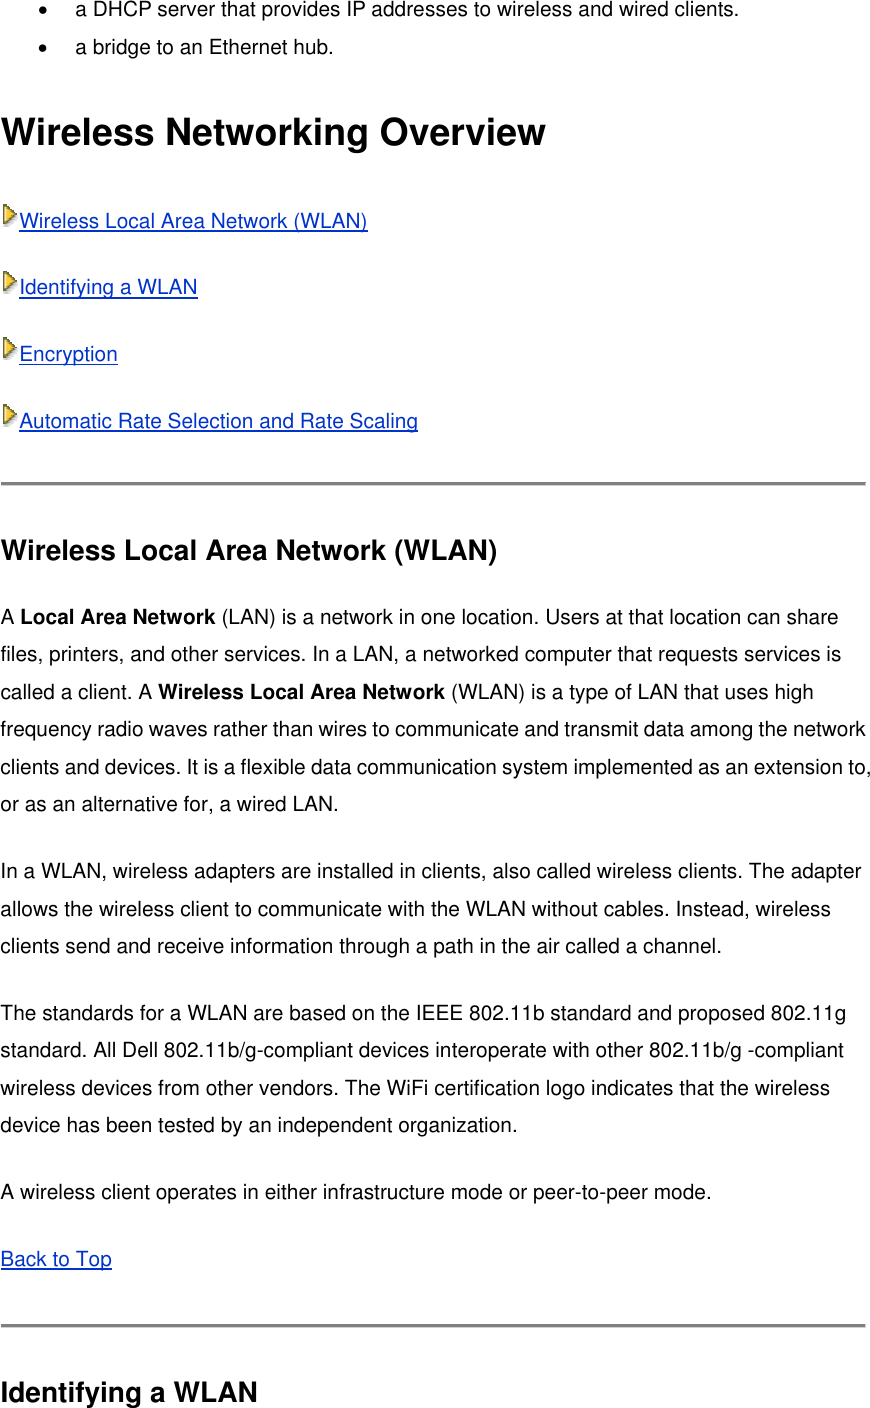 •  a DHCP server that provides IP addresses to wireless and wired clients.   •  a bridge to an Ethernet hub.   Wireless Networking Overview Wireless Local Area Network (WLAN) Identifying a WLAN Encryption Automatic Rate Selection and Rate Scaling  Wireless Local Area Network (WLAN) A Local Area Network (LAN) is a network in one location. Users at that location can share files, printers, and other services. In a LAN, a networked computer that requests services is called a client. A Wireless Local Area Network (WLAN) is a type of LAN that uses high frequency radio waves rather than wires to communicate and transmit data among the network clients and devices. It is a flexible data communication system implemented as an extension to, or as an alternative for, a wired LAN. In a WLAN, wireless adapters are installed in clients, also called wireless clients. The adapter allows the wireless client to communicate with the WLAN without cables. Instead, wireless clients send and receive information through a path in the air called a channel. The standards for a WLAN are based on the IEEE 802.11b standard and proposed 802.11g standard. All Dell 802.11b/g-compliant devices interoperate with other 802.11b/g -compliant wireless devices from other vendors. The WiFi certification logo indicates that the wireless device has been tested by an independent organization. A wireless client operates in either infrastructure mode or peer-to-peer mode. Back to Top  Identifying a WLAN 